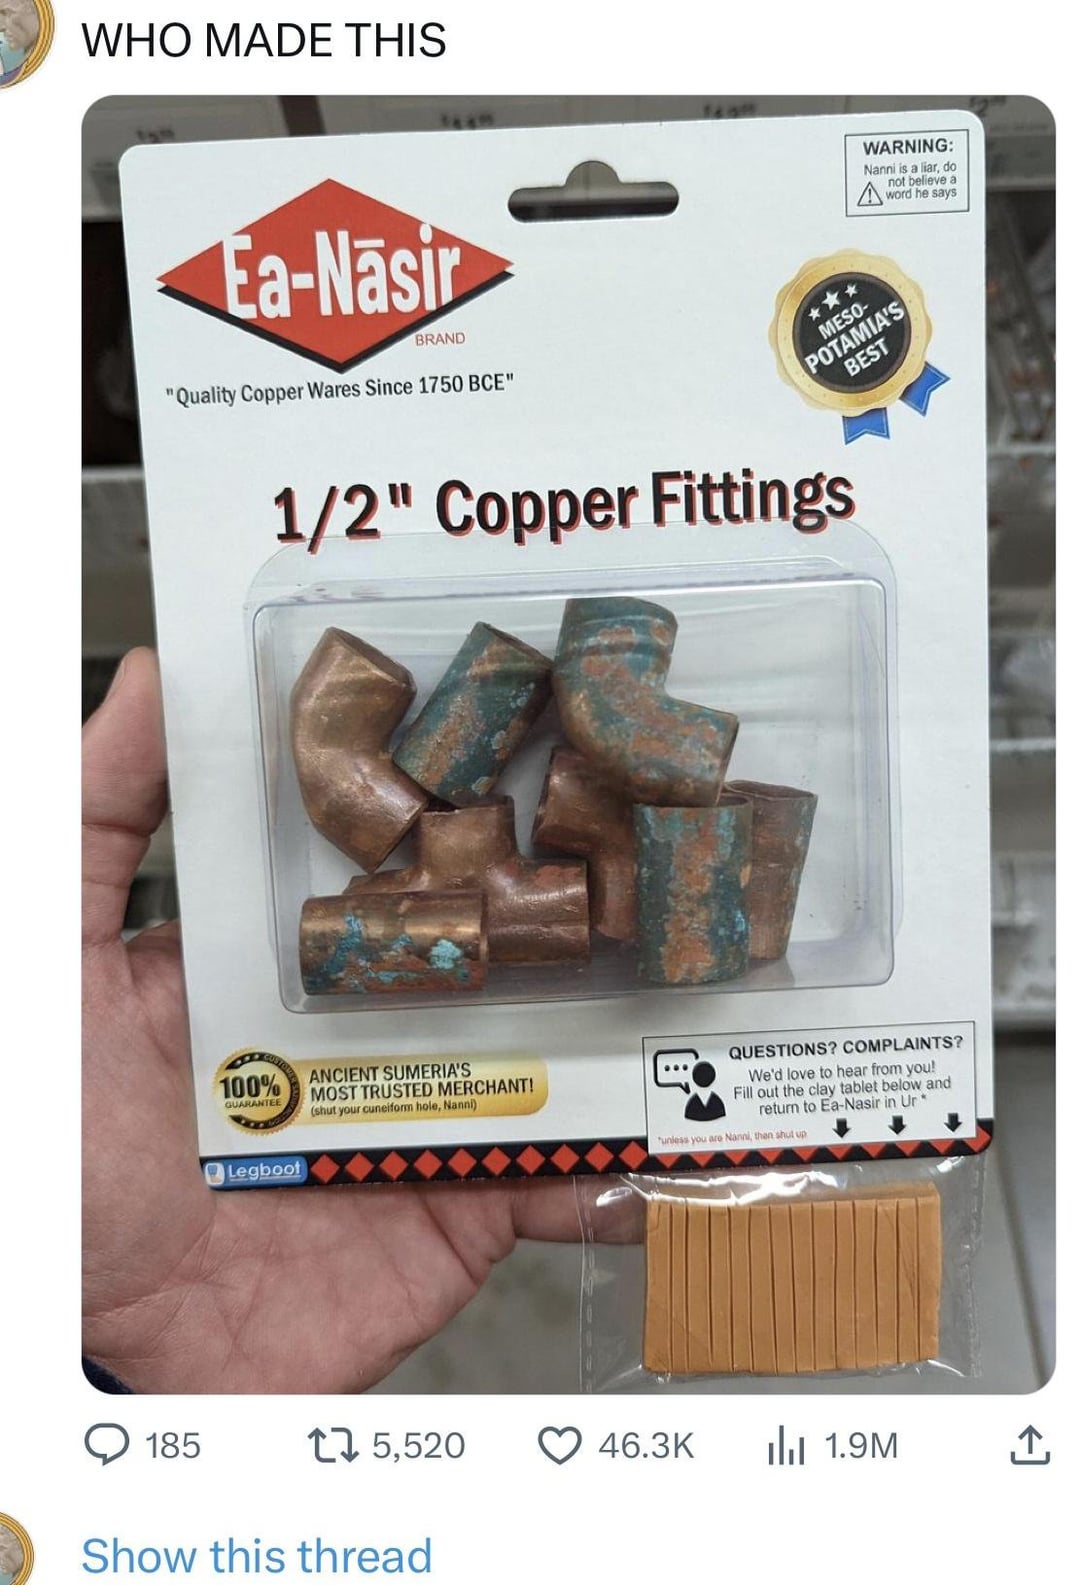 funny tweets and memes - ea nasir copper fittings - Who Made This EaNasir 185 "Quality Copper Wares Since 1750 Bce" Brand 100% Guarantee 12" Copper Fittings Legboot Ancient Sumeria'S Most Trusted Merchant! shut your cuneiform hole, Nanni t 5,520 Novices S